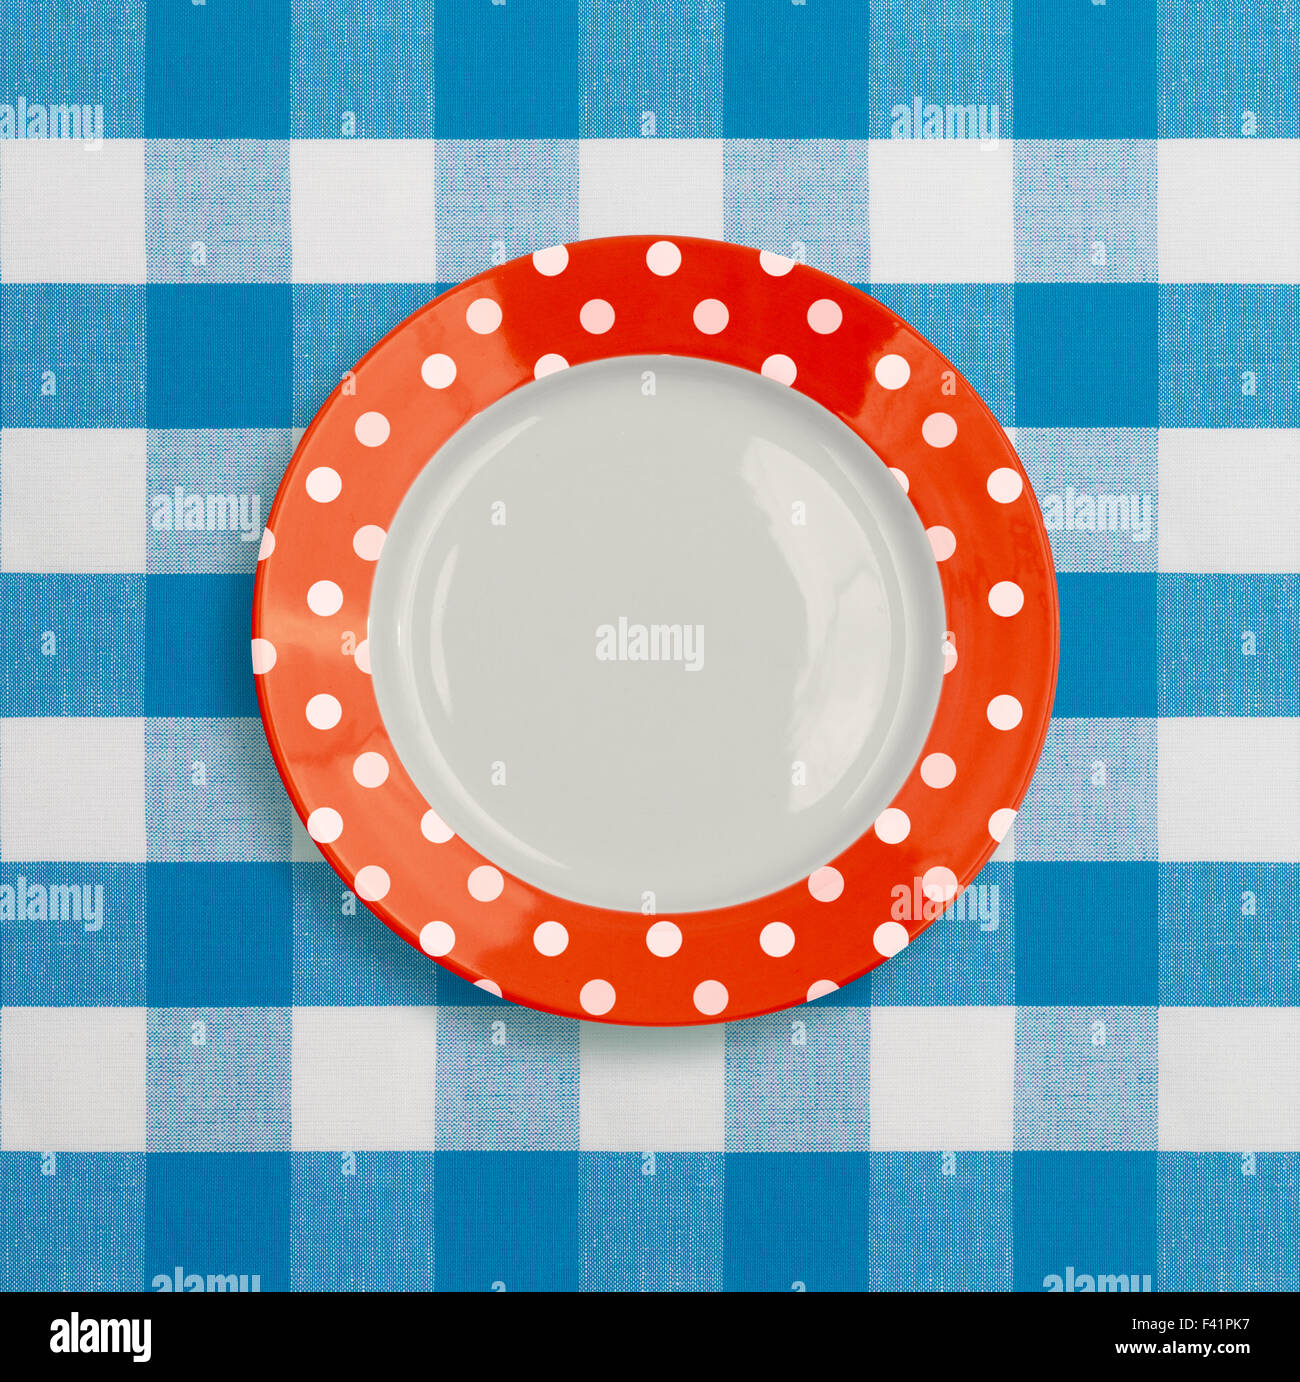 Polka dot red white dinner plate on blue checked tablecloth Stock Photo